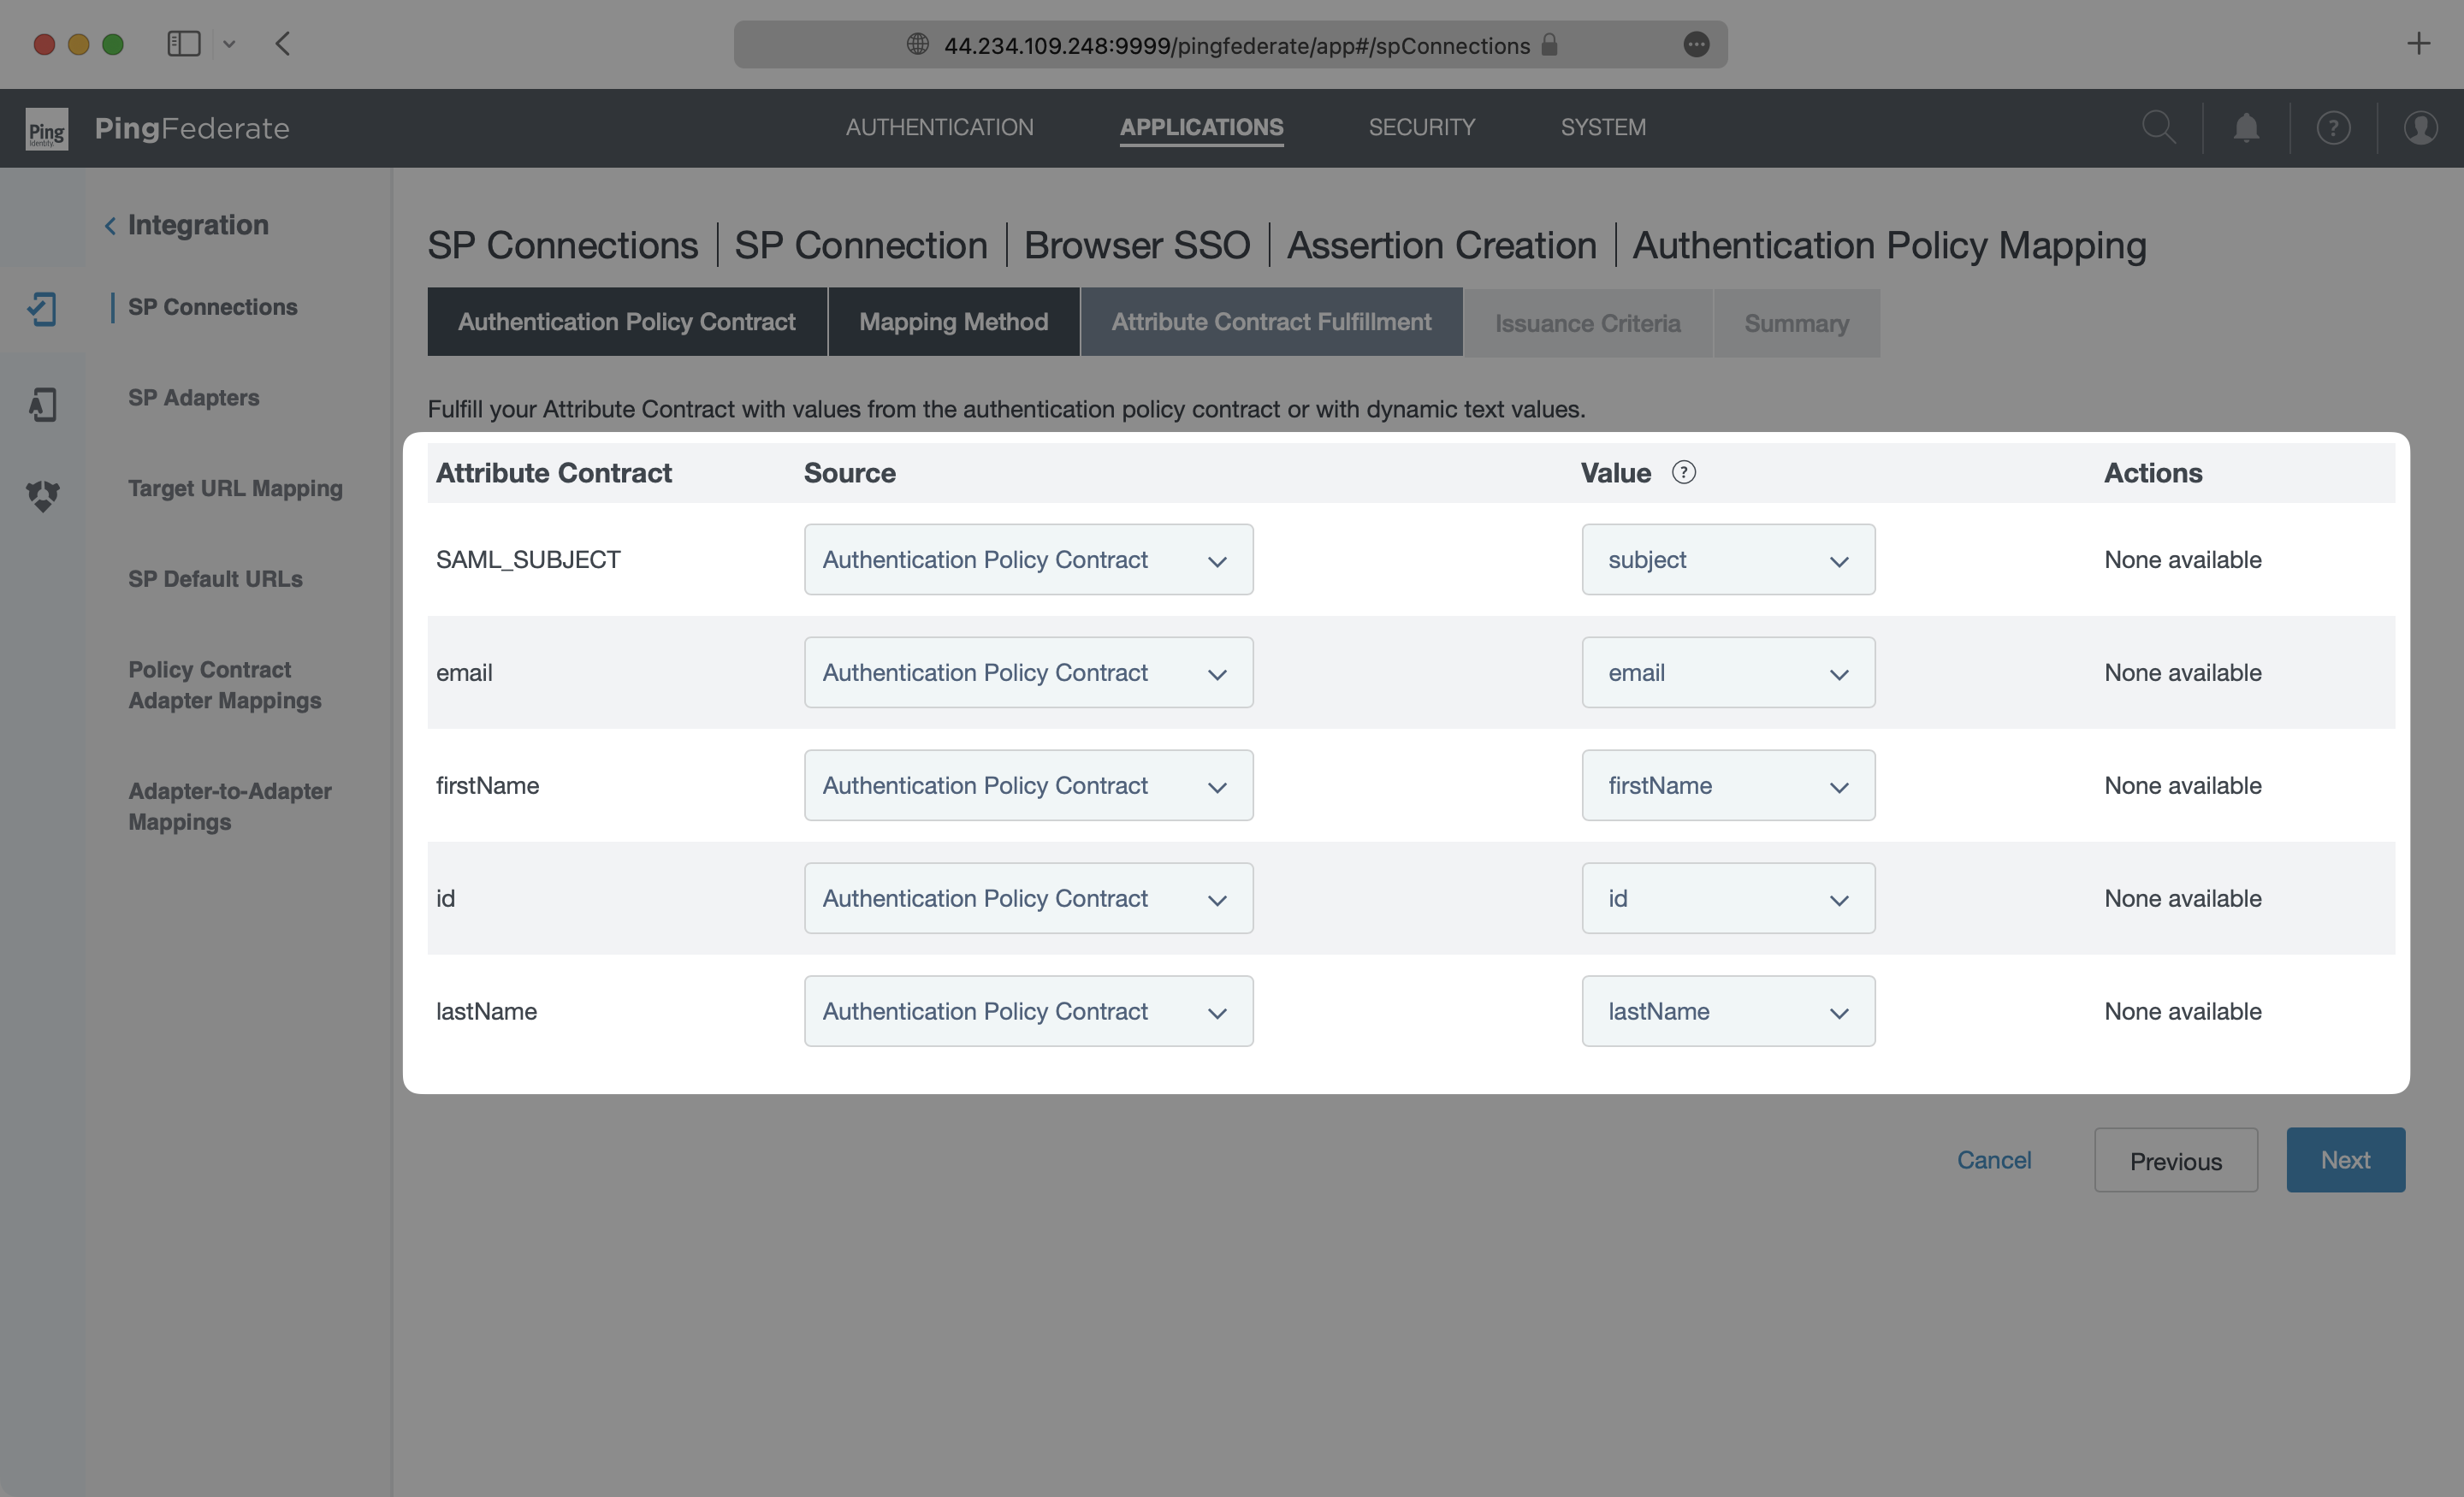 A screenshot showing an example of Authentication Policy Mappings in PingFederate.